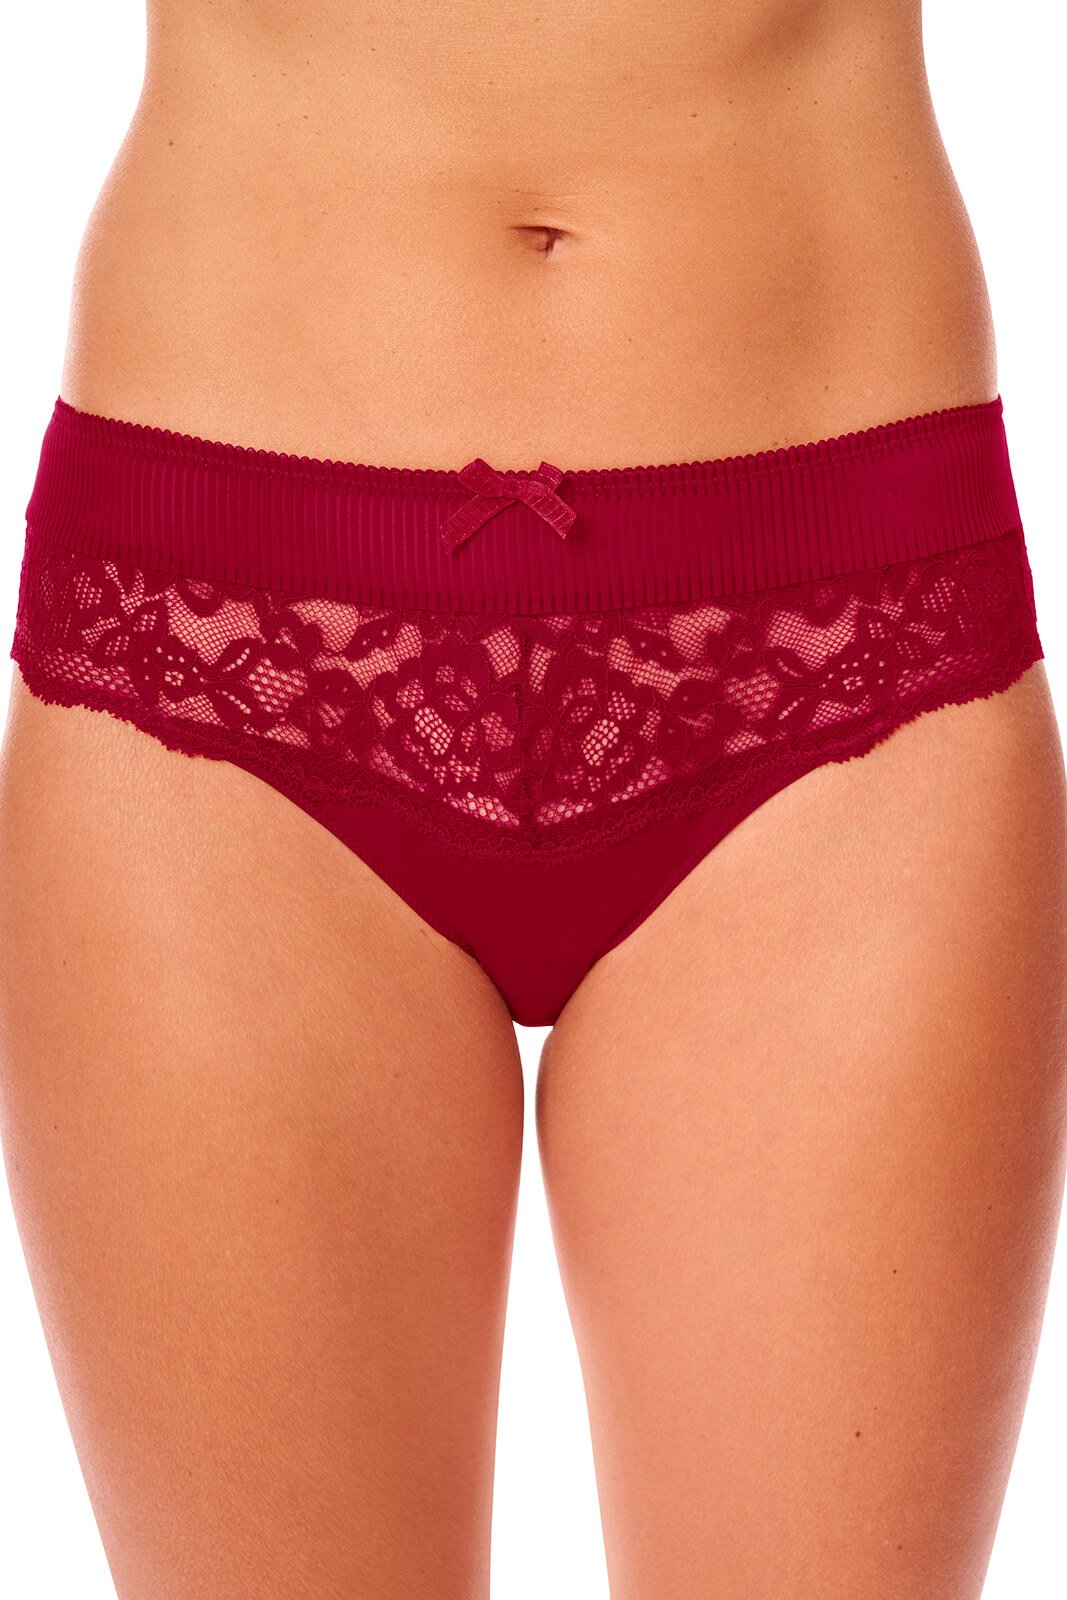 Calvin Klein Curve Embossed Icon cotton blend lingerie set in red